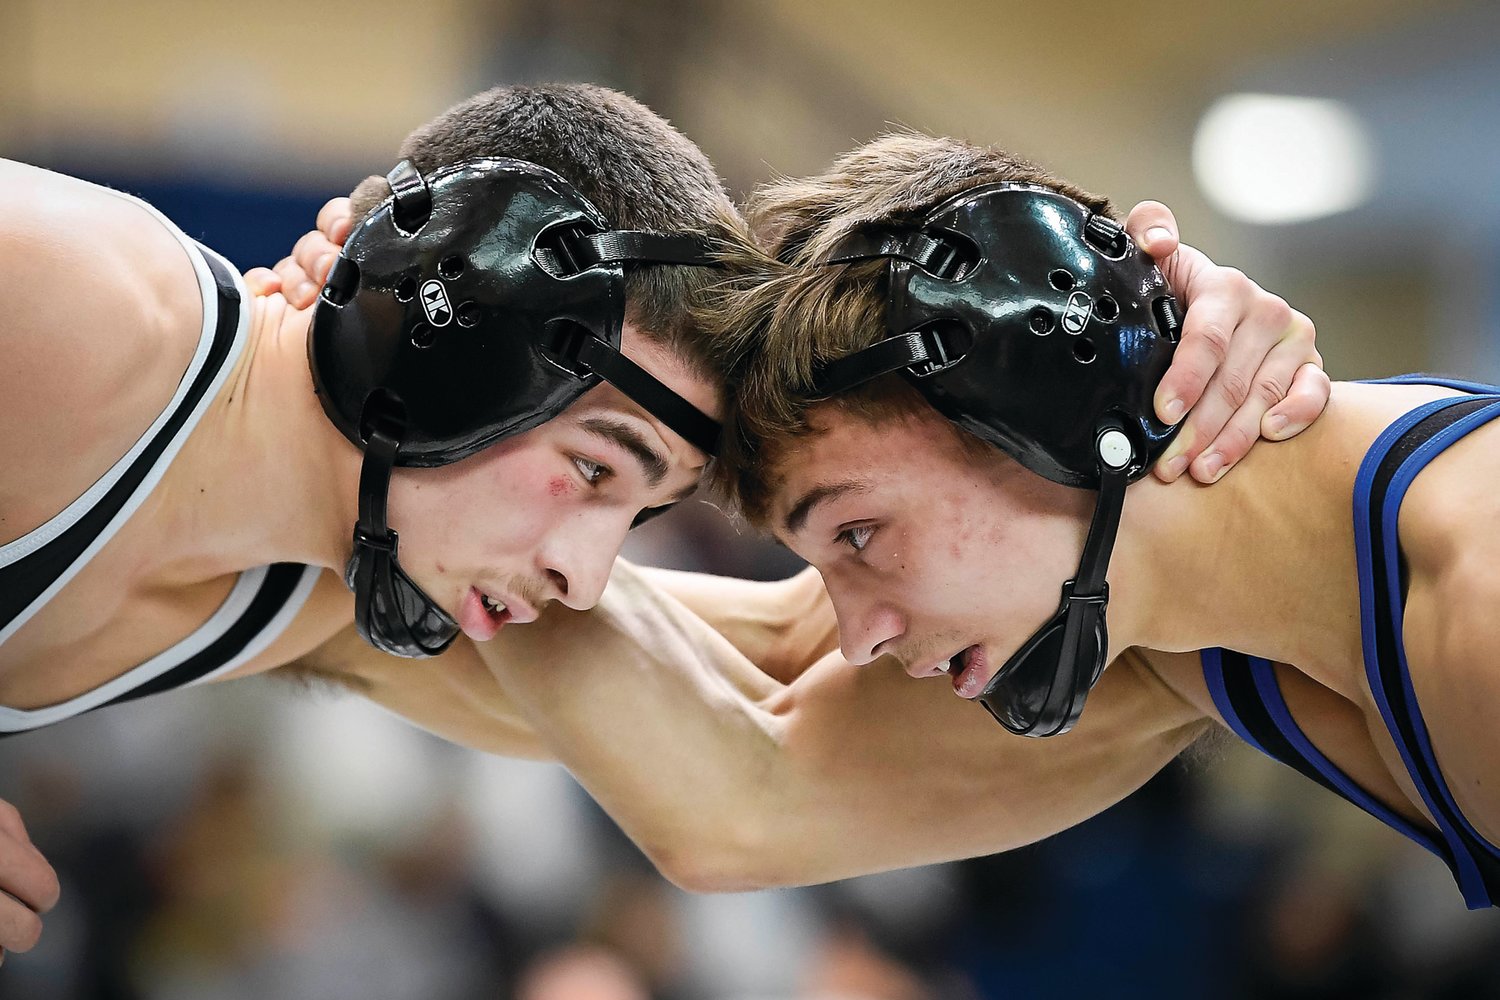 Faith Christian Academy’s Gauge Botero and Quakertown’s Mason Ziegler butt heads during the 121-pound semifinal match won by Botero on a 2-1 decision.